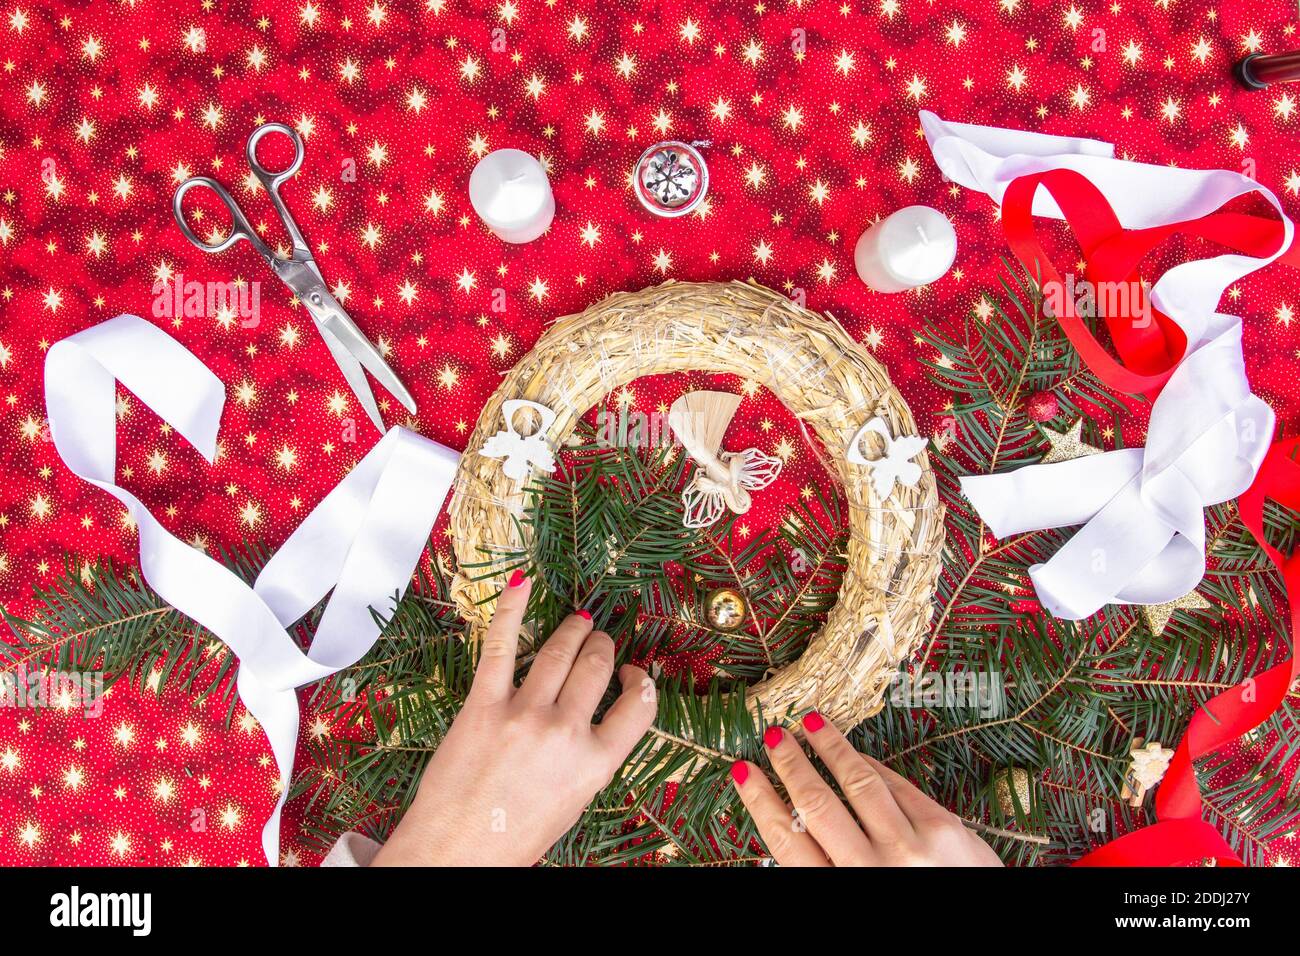 Handmade Christmas wreath with ribbons.Step by step, tutorial.Xmas colorful background.Winter holiday seasonal decor.Creating DIY project.Handcraft ac Stock Photo